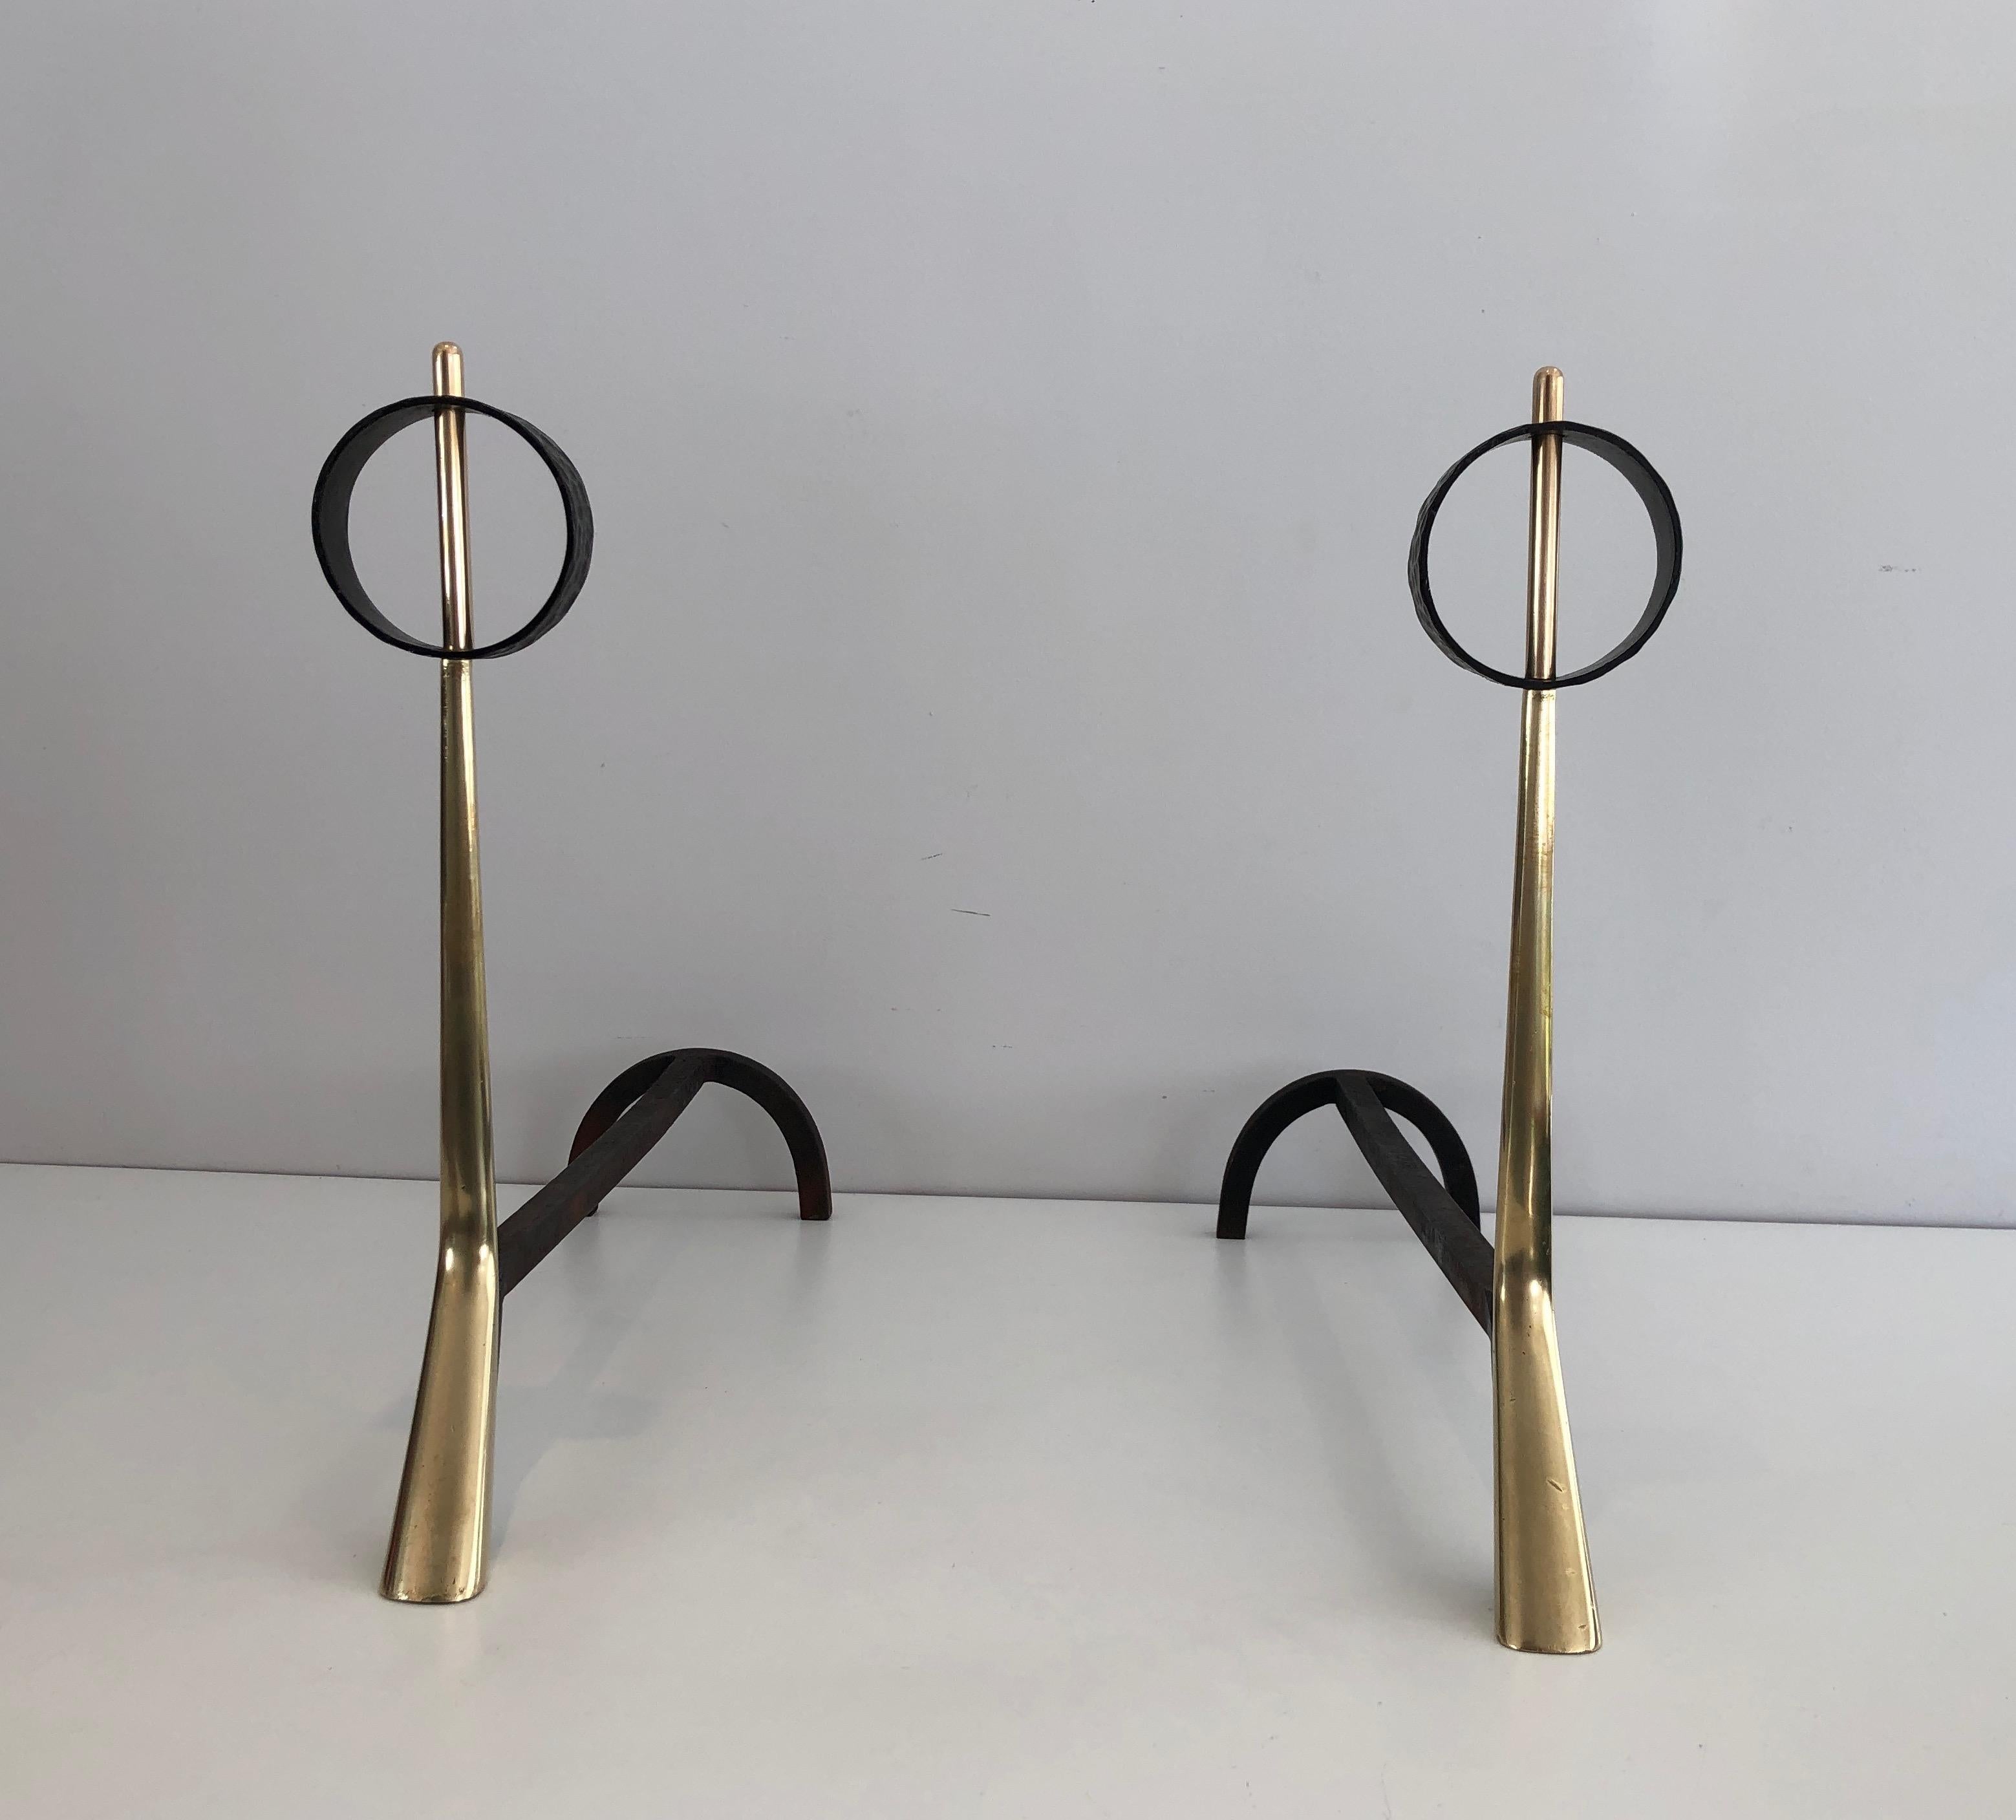 This very nice pair of modernist andirons is made of bronze and wrought iron andirons. This is a very interesting Italian design, circa 1950.